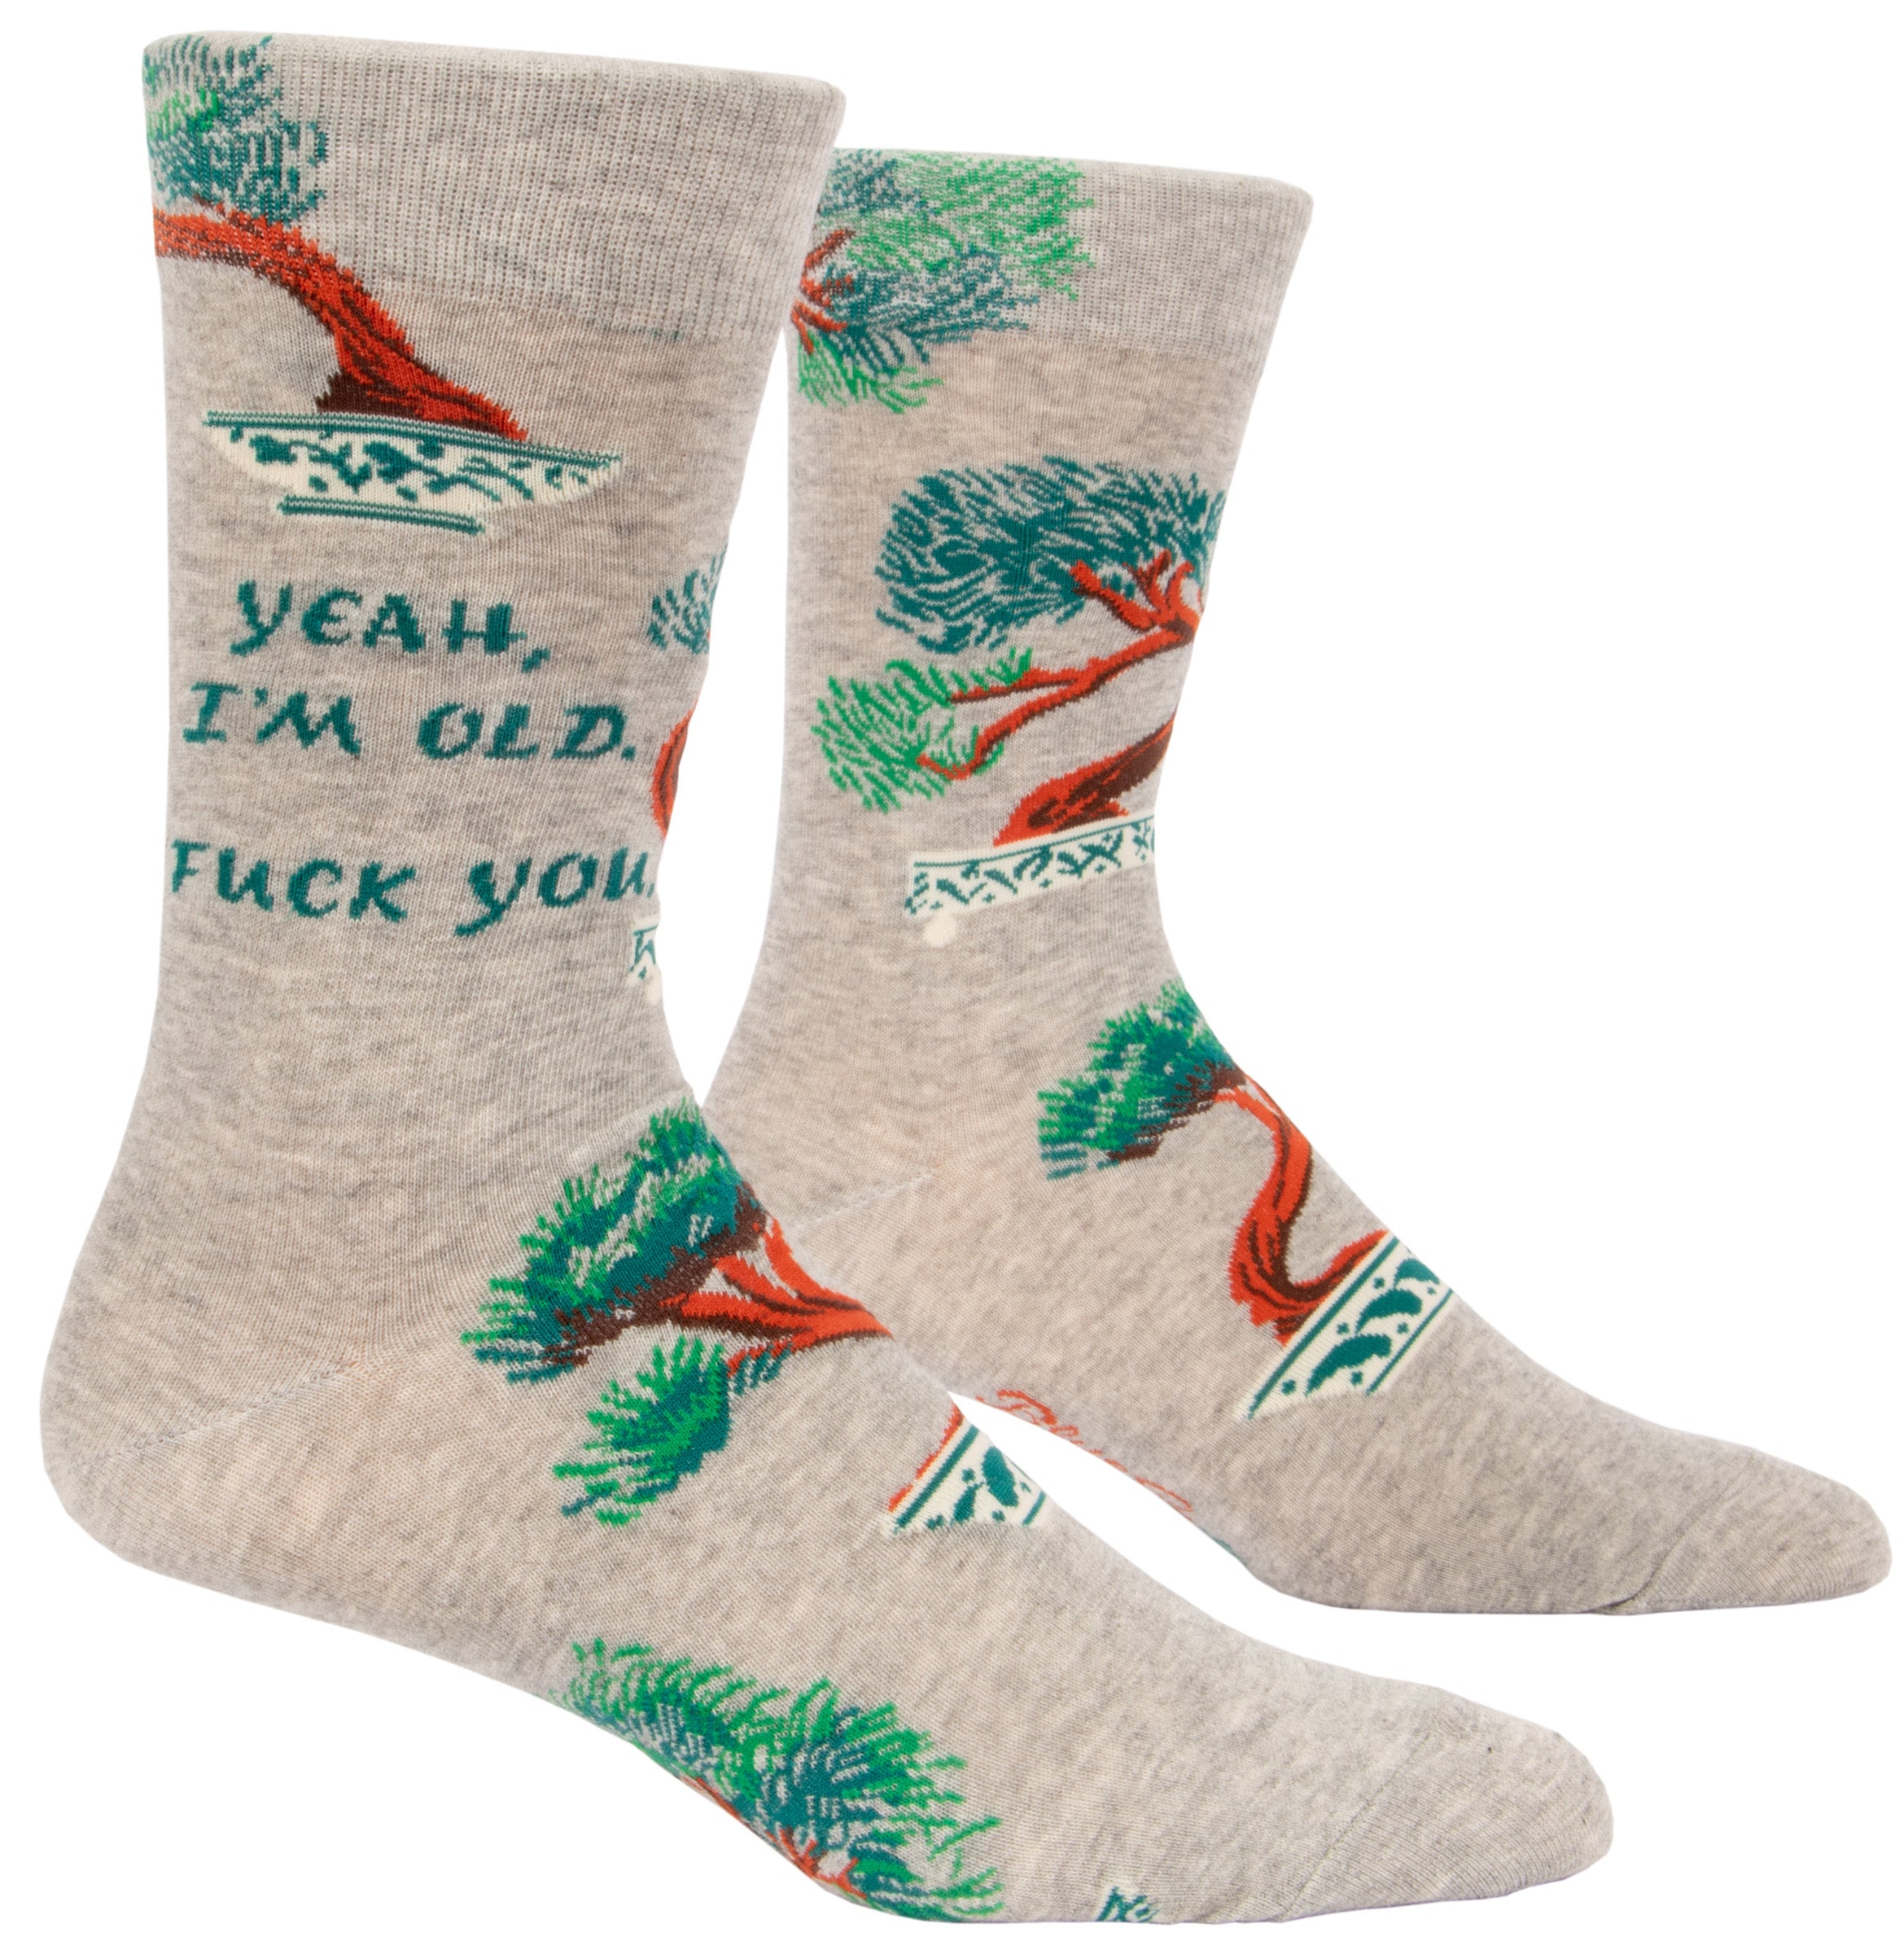 grey socks with green bonsai trees and says yeah, i'm old. fuck you